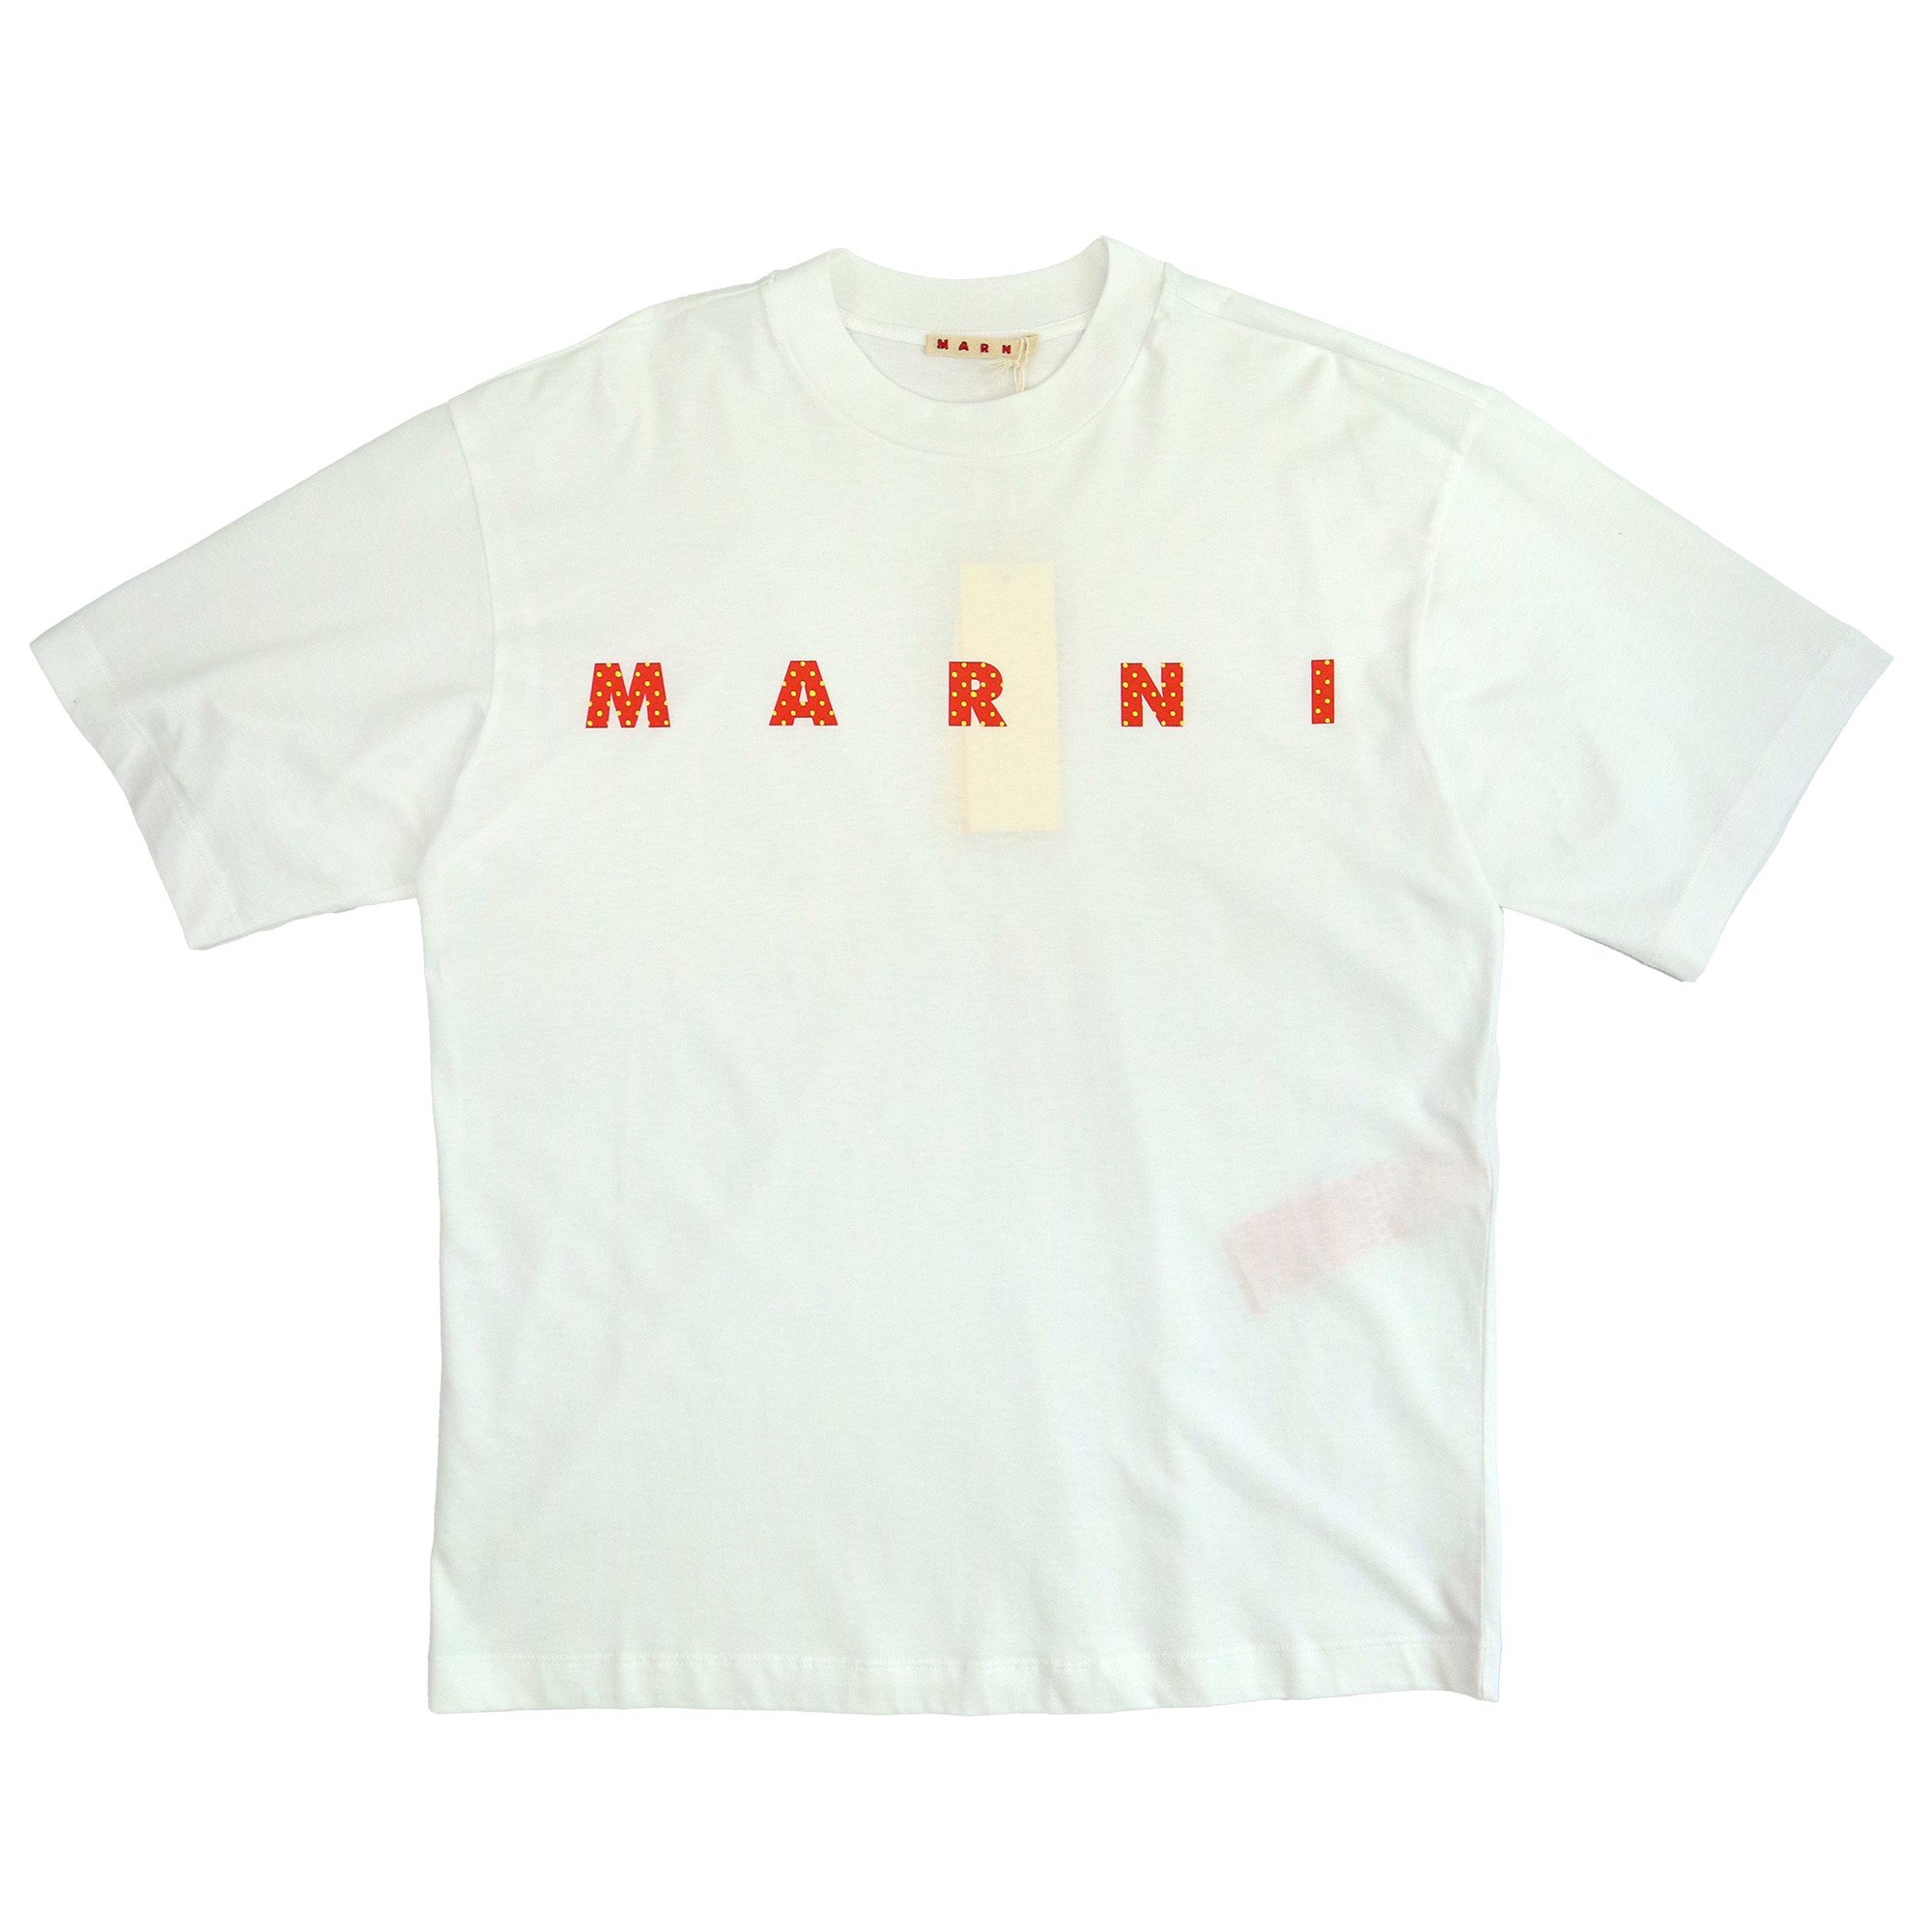 <img class='new_mark_img1' src='https://img.shop-pro.jp/img/new/icons21.gif' style='border:none;display:inline;margin:0px;padding:0px;width:auto;' />MARNI PRINT T-SHIRT【30%OFF】